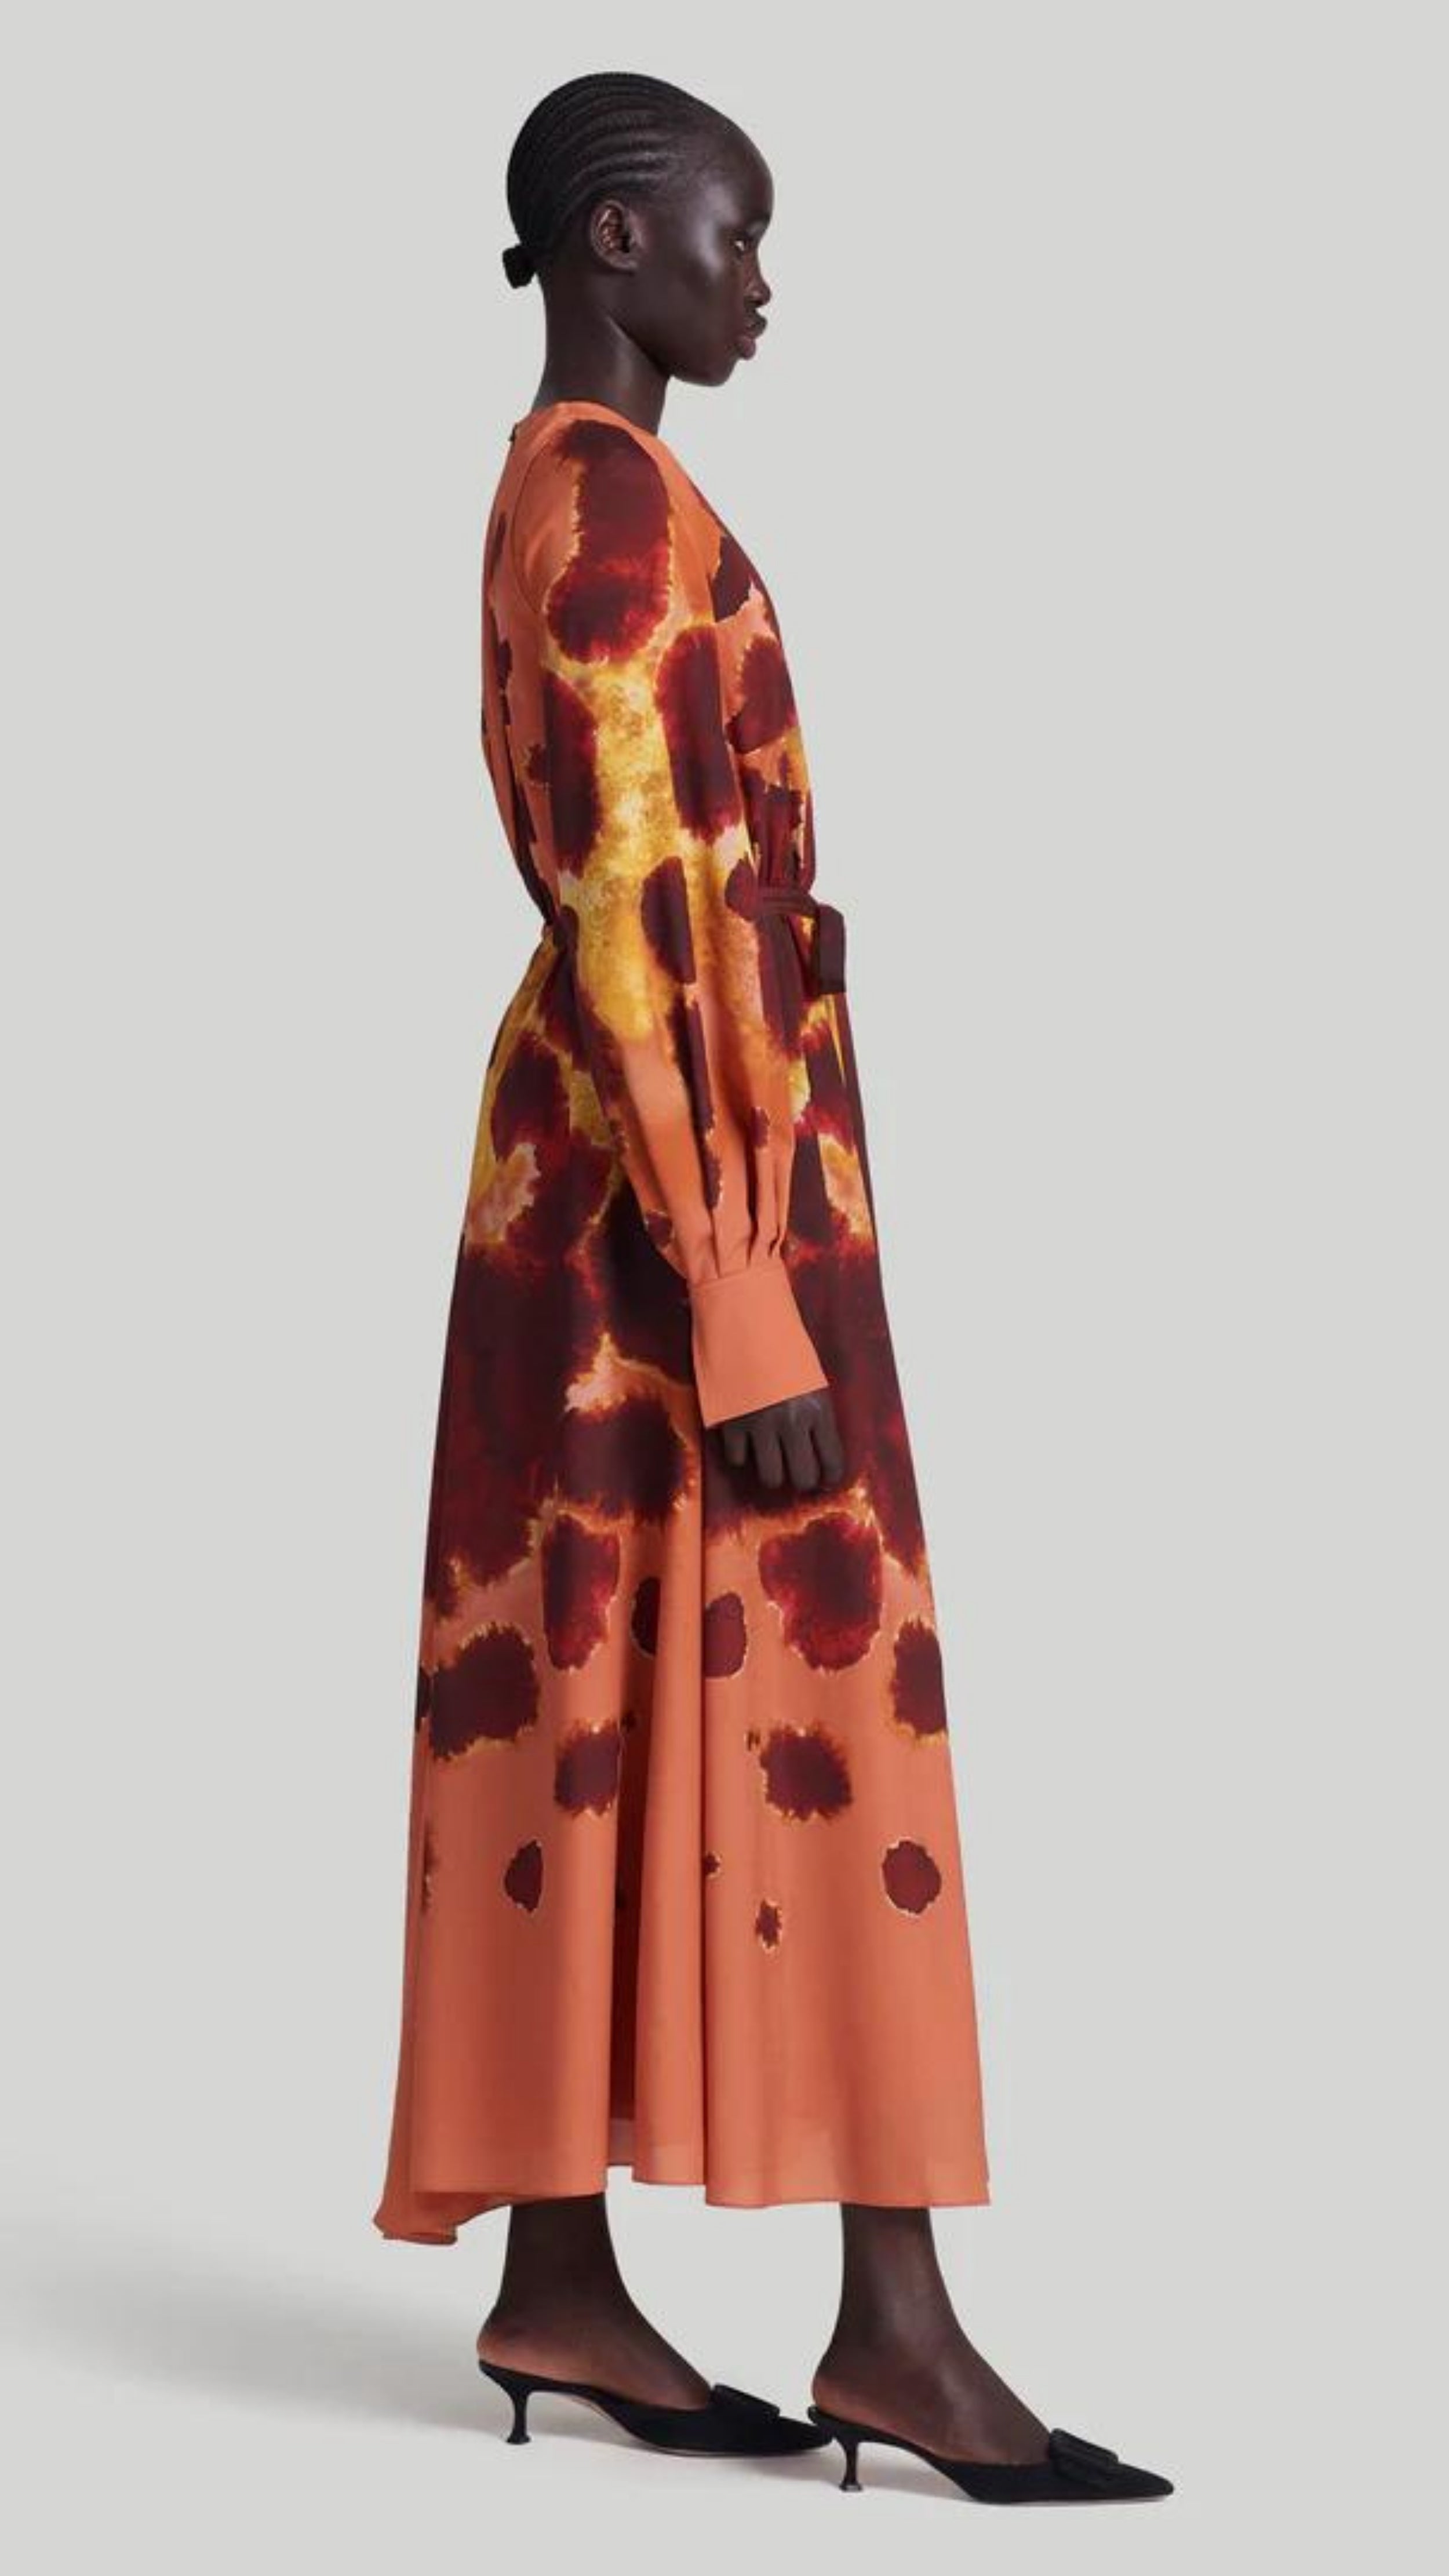 Altuzarra Peirene Dress. The Peirene midi dress has a relaxed silhouette with a tie at the waist. The keyhole neck can be styled closed or open, creating a v-neck look. Made in beautiful peach, cranberry, and yellow dyed pattern. Shown on model facing side